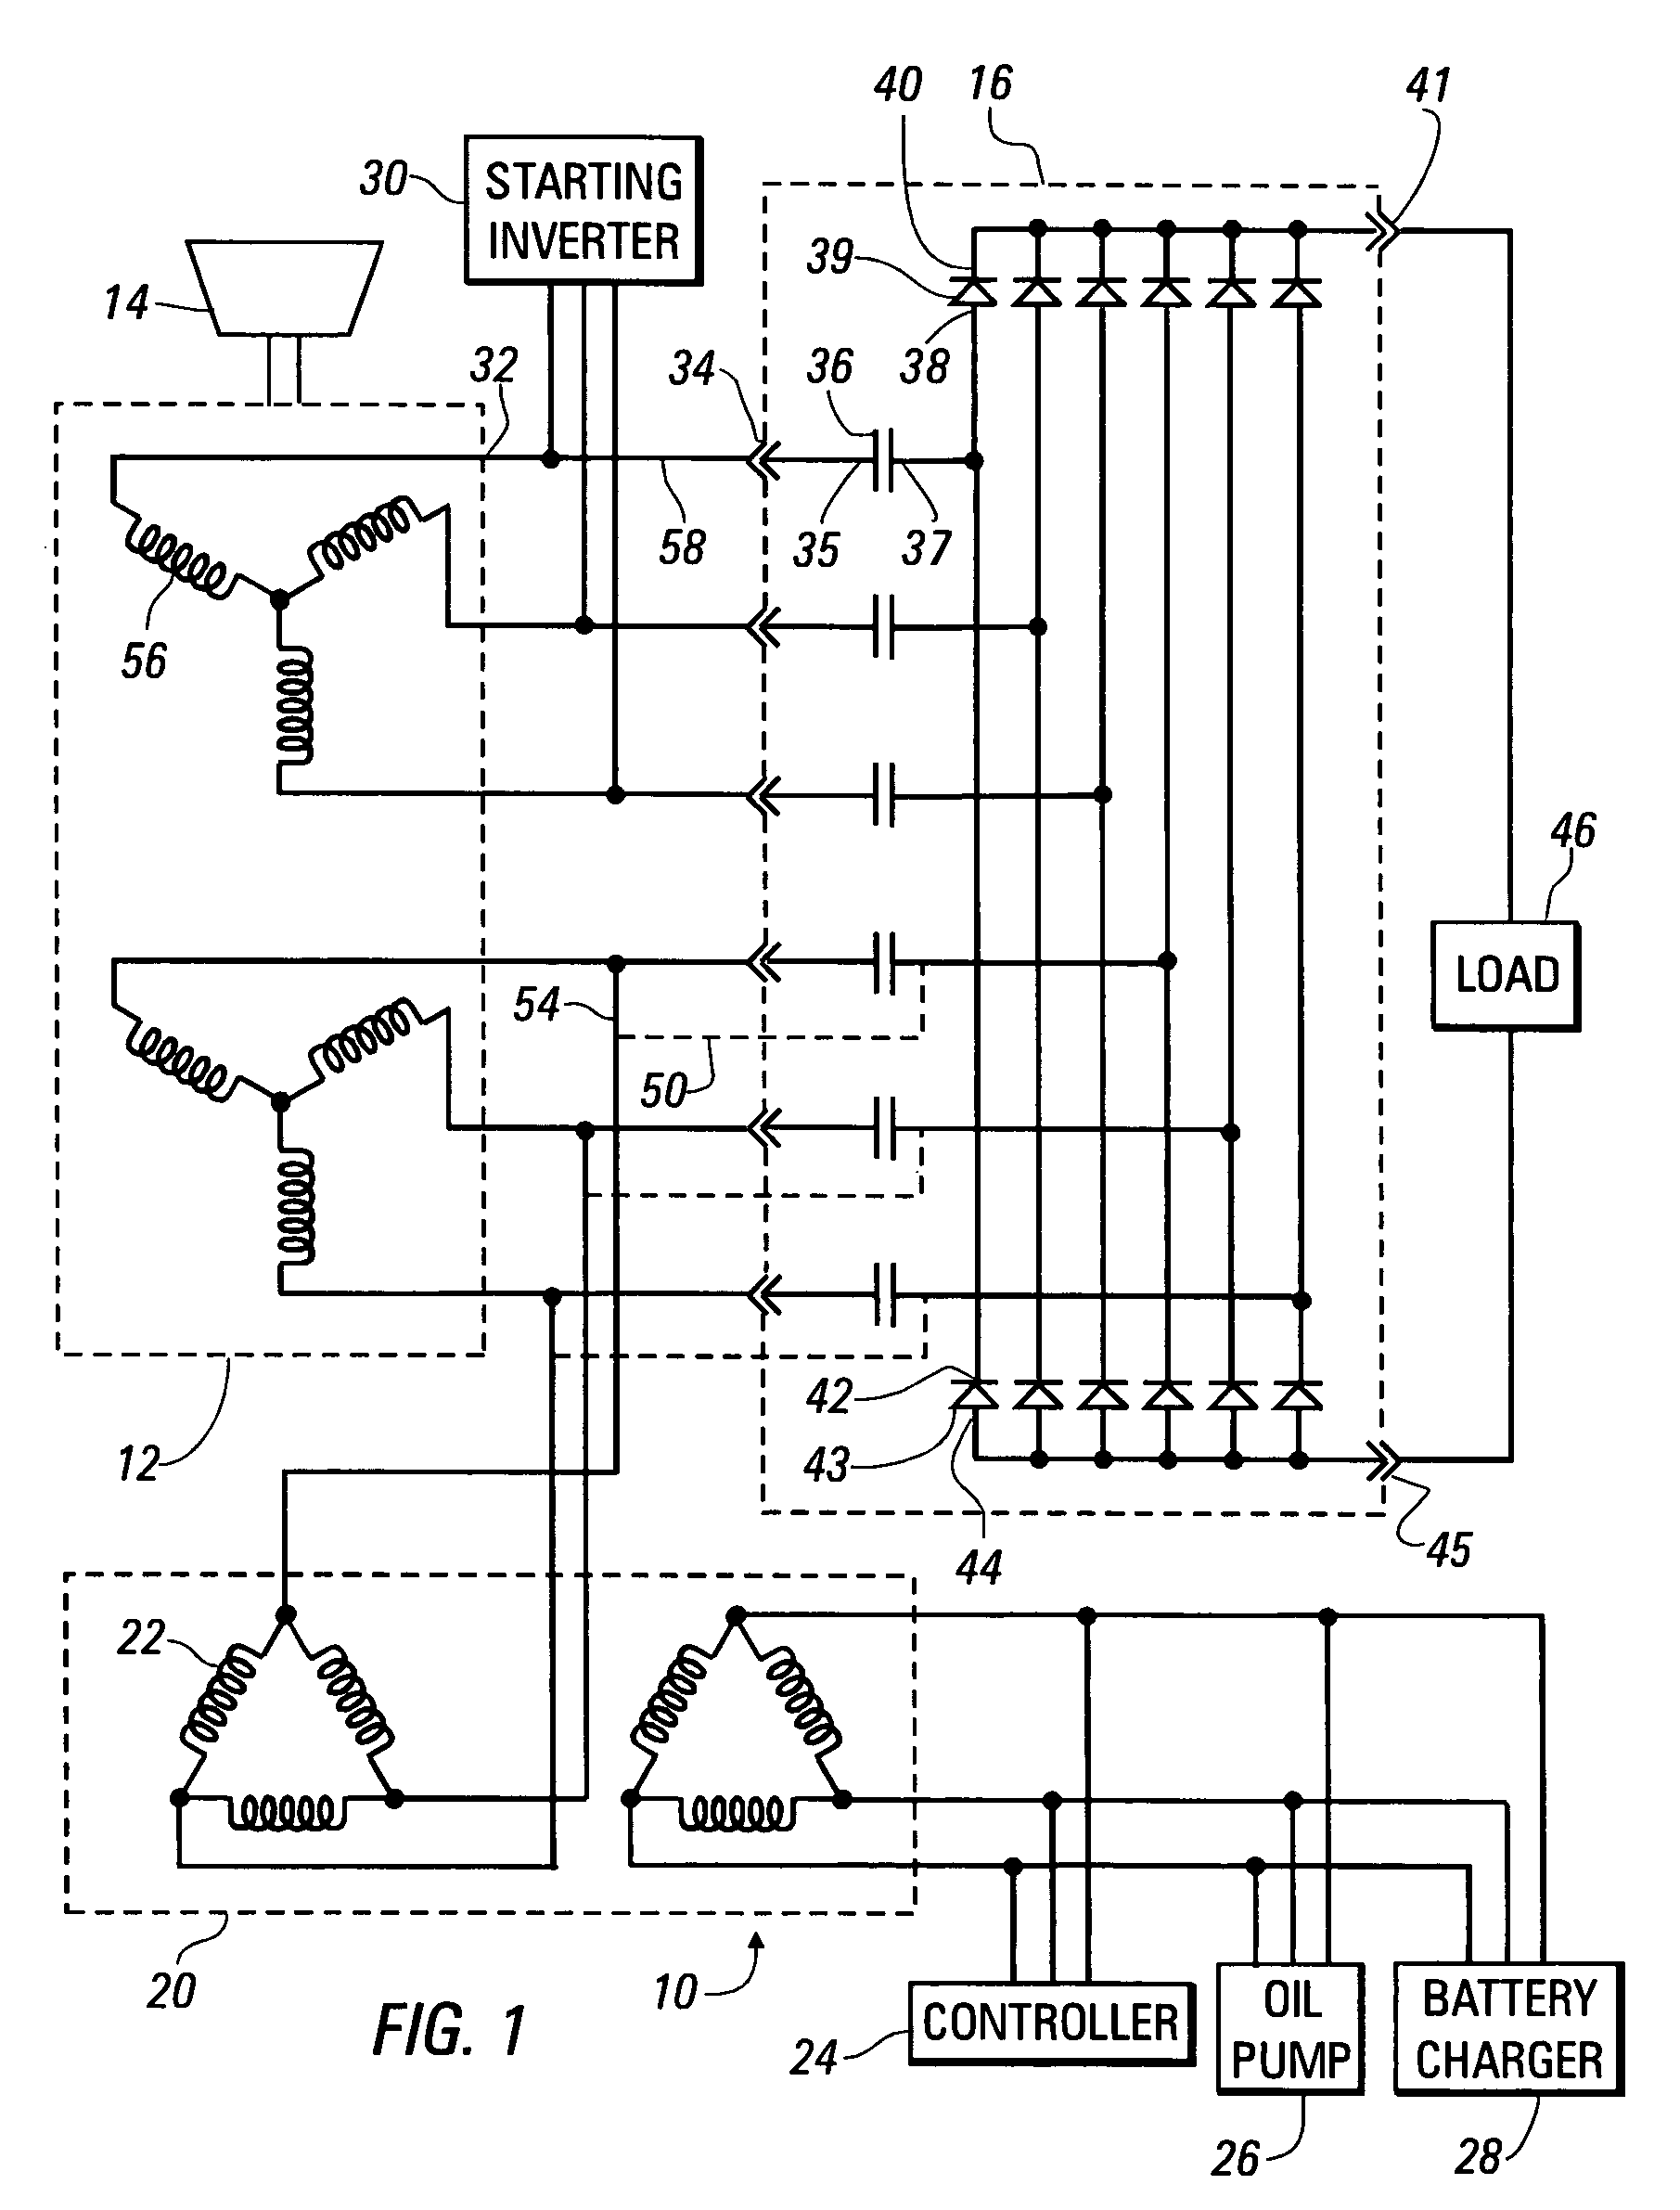 Power generating system including a high-frequency alternator, a rectifier module, and an auxiliary power supply